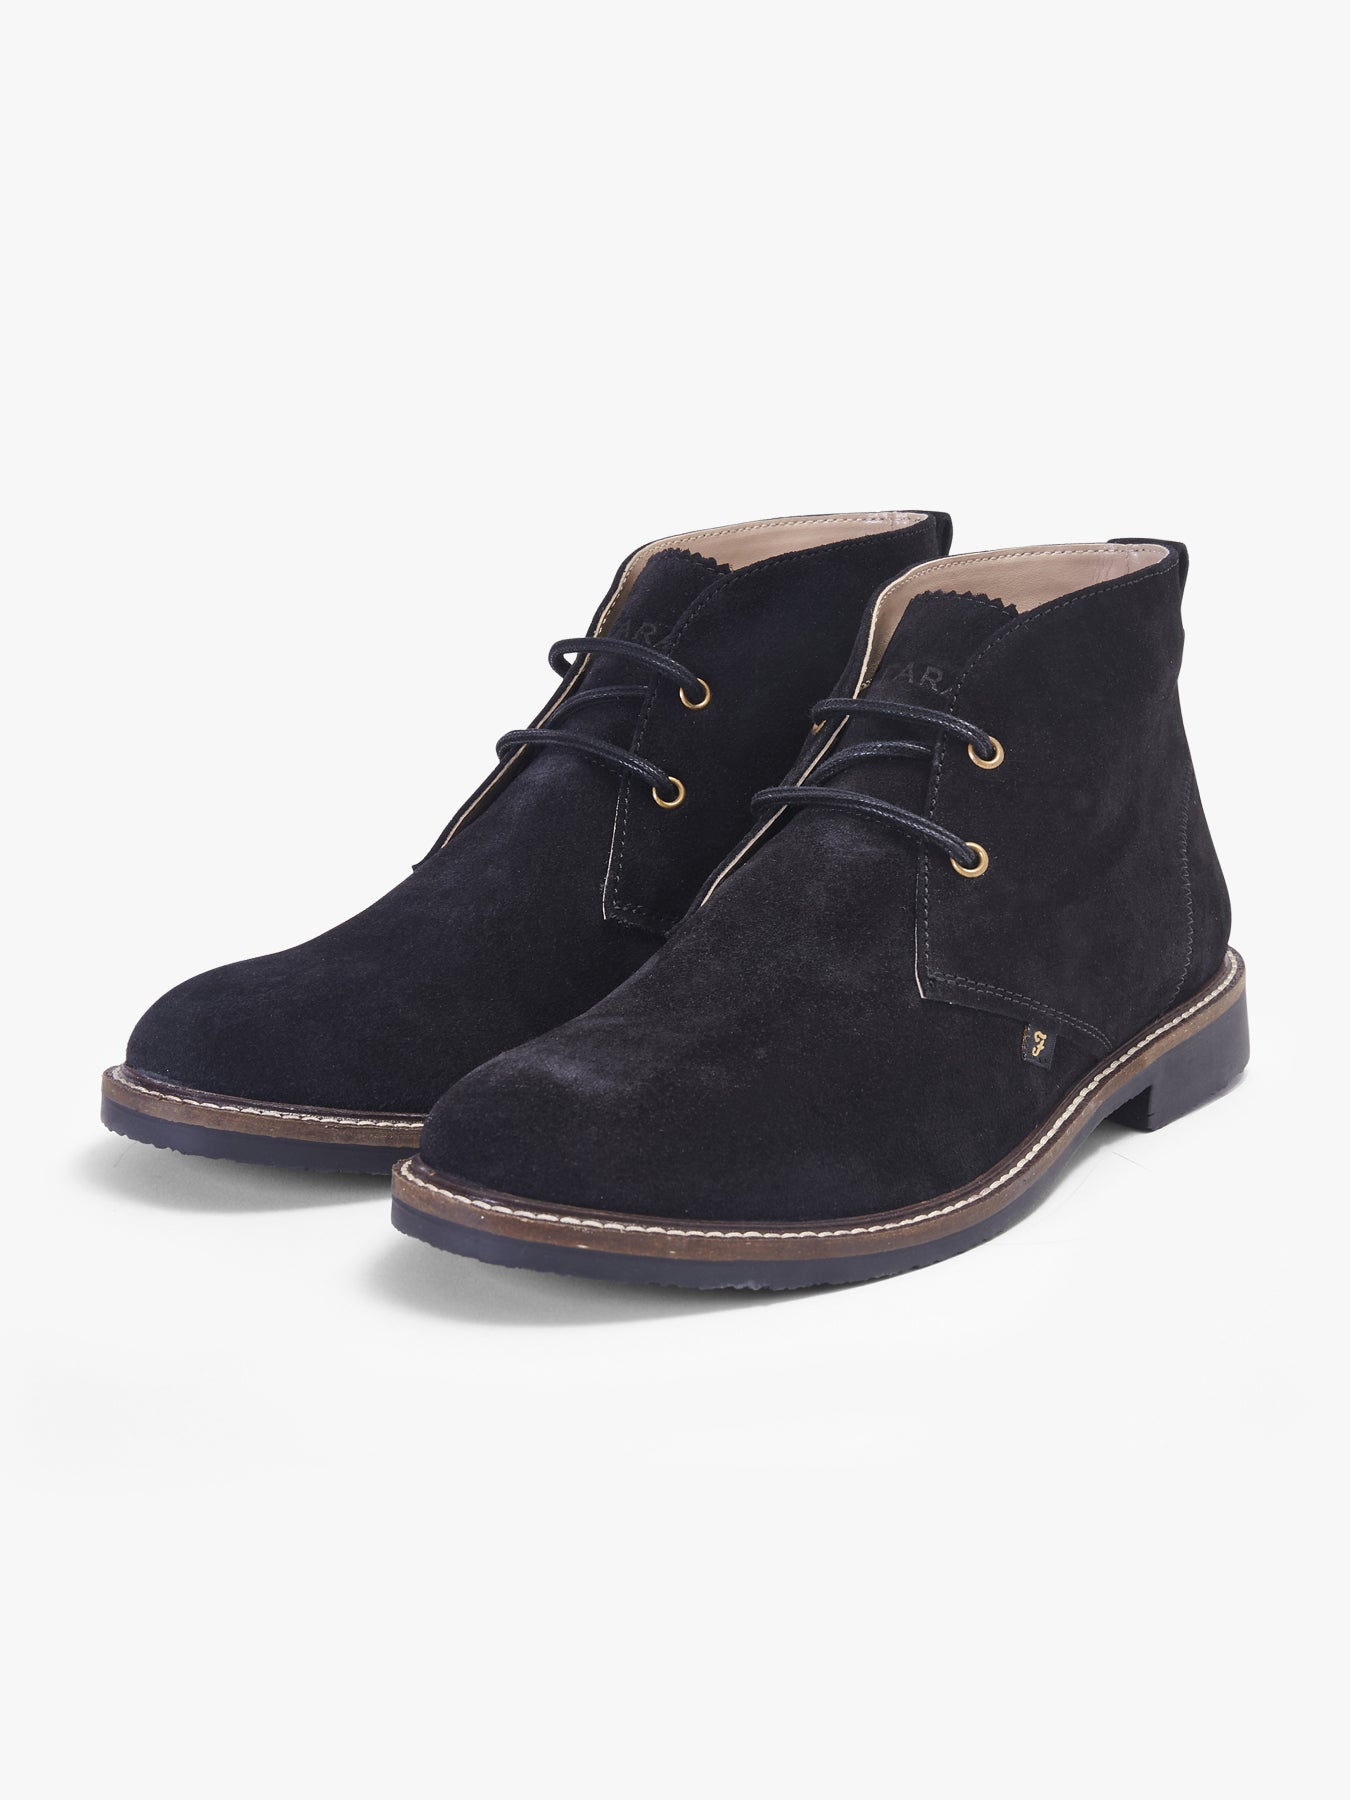 View Briggs Suede Leather Desert Boots In Jet Black information